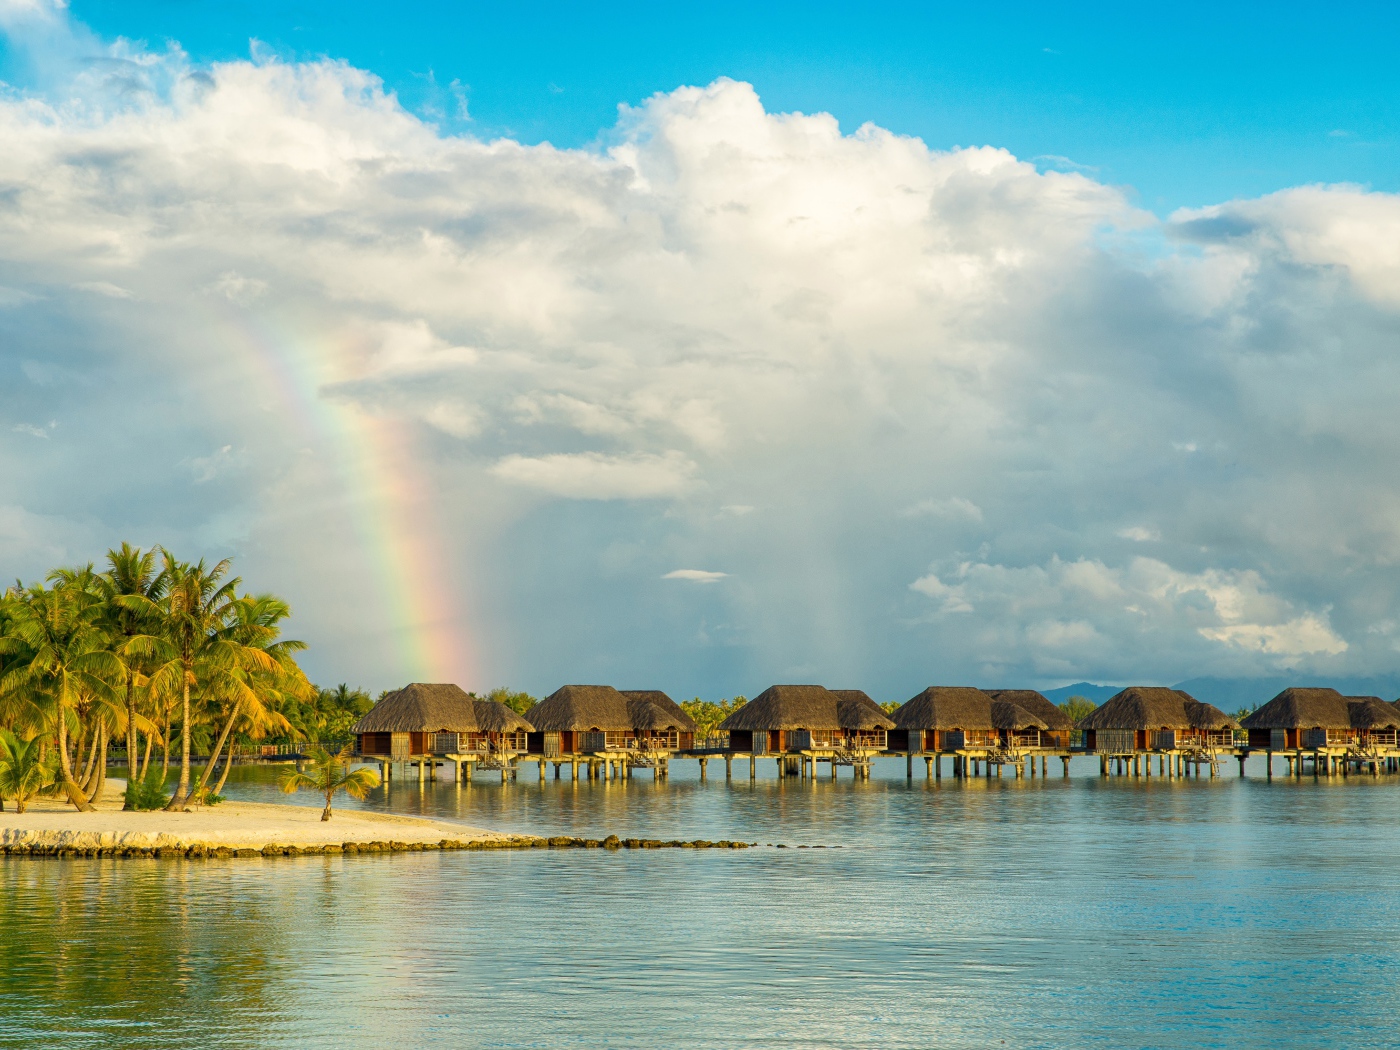 Bungalow in the water on a tropical beach under a cloudy sky with a rainbow